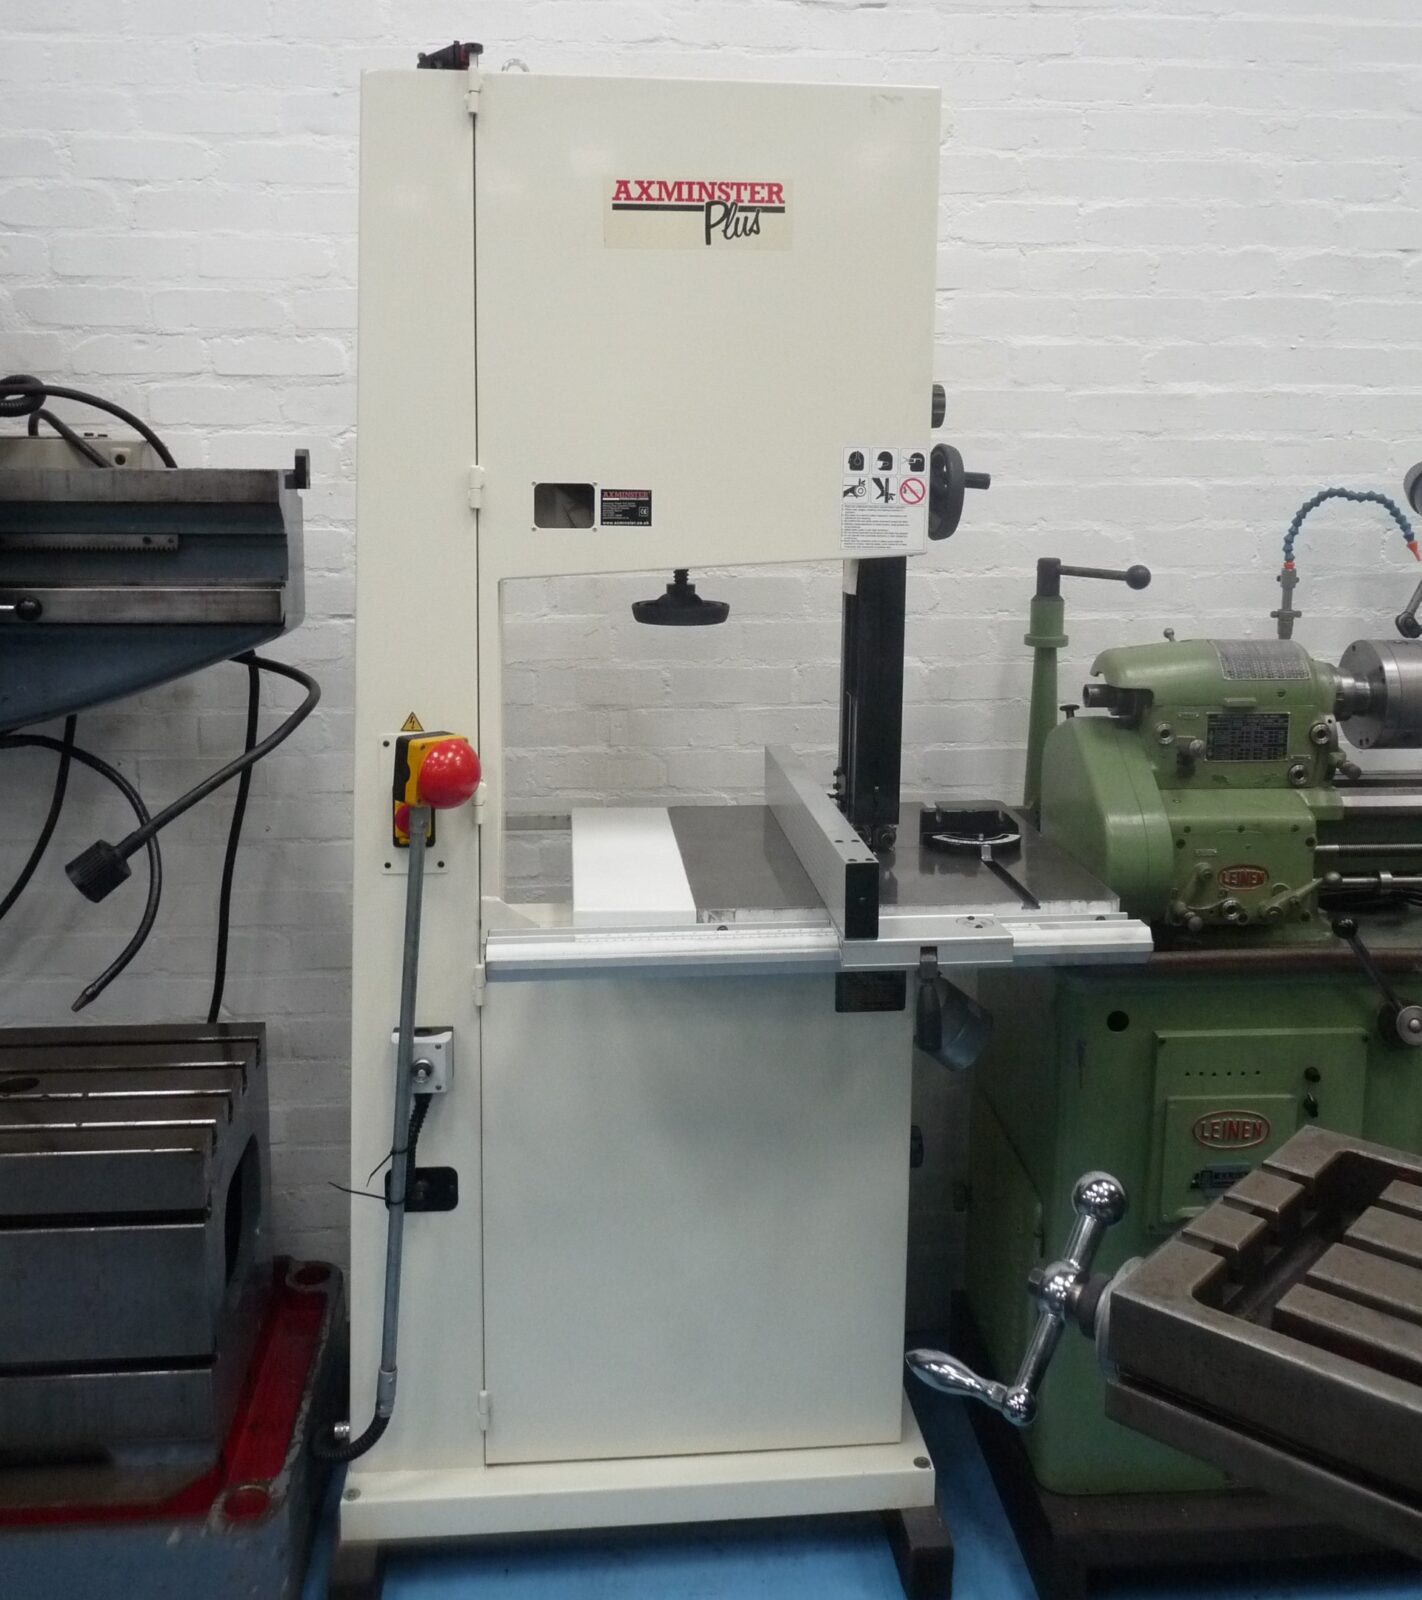 Axminster Plus 600 Vertical Wood Cutting Band Saw